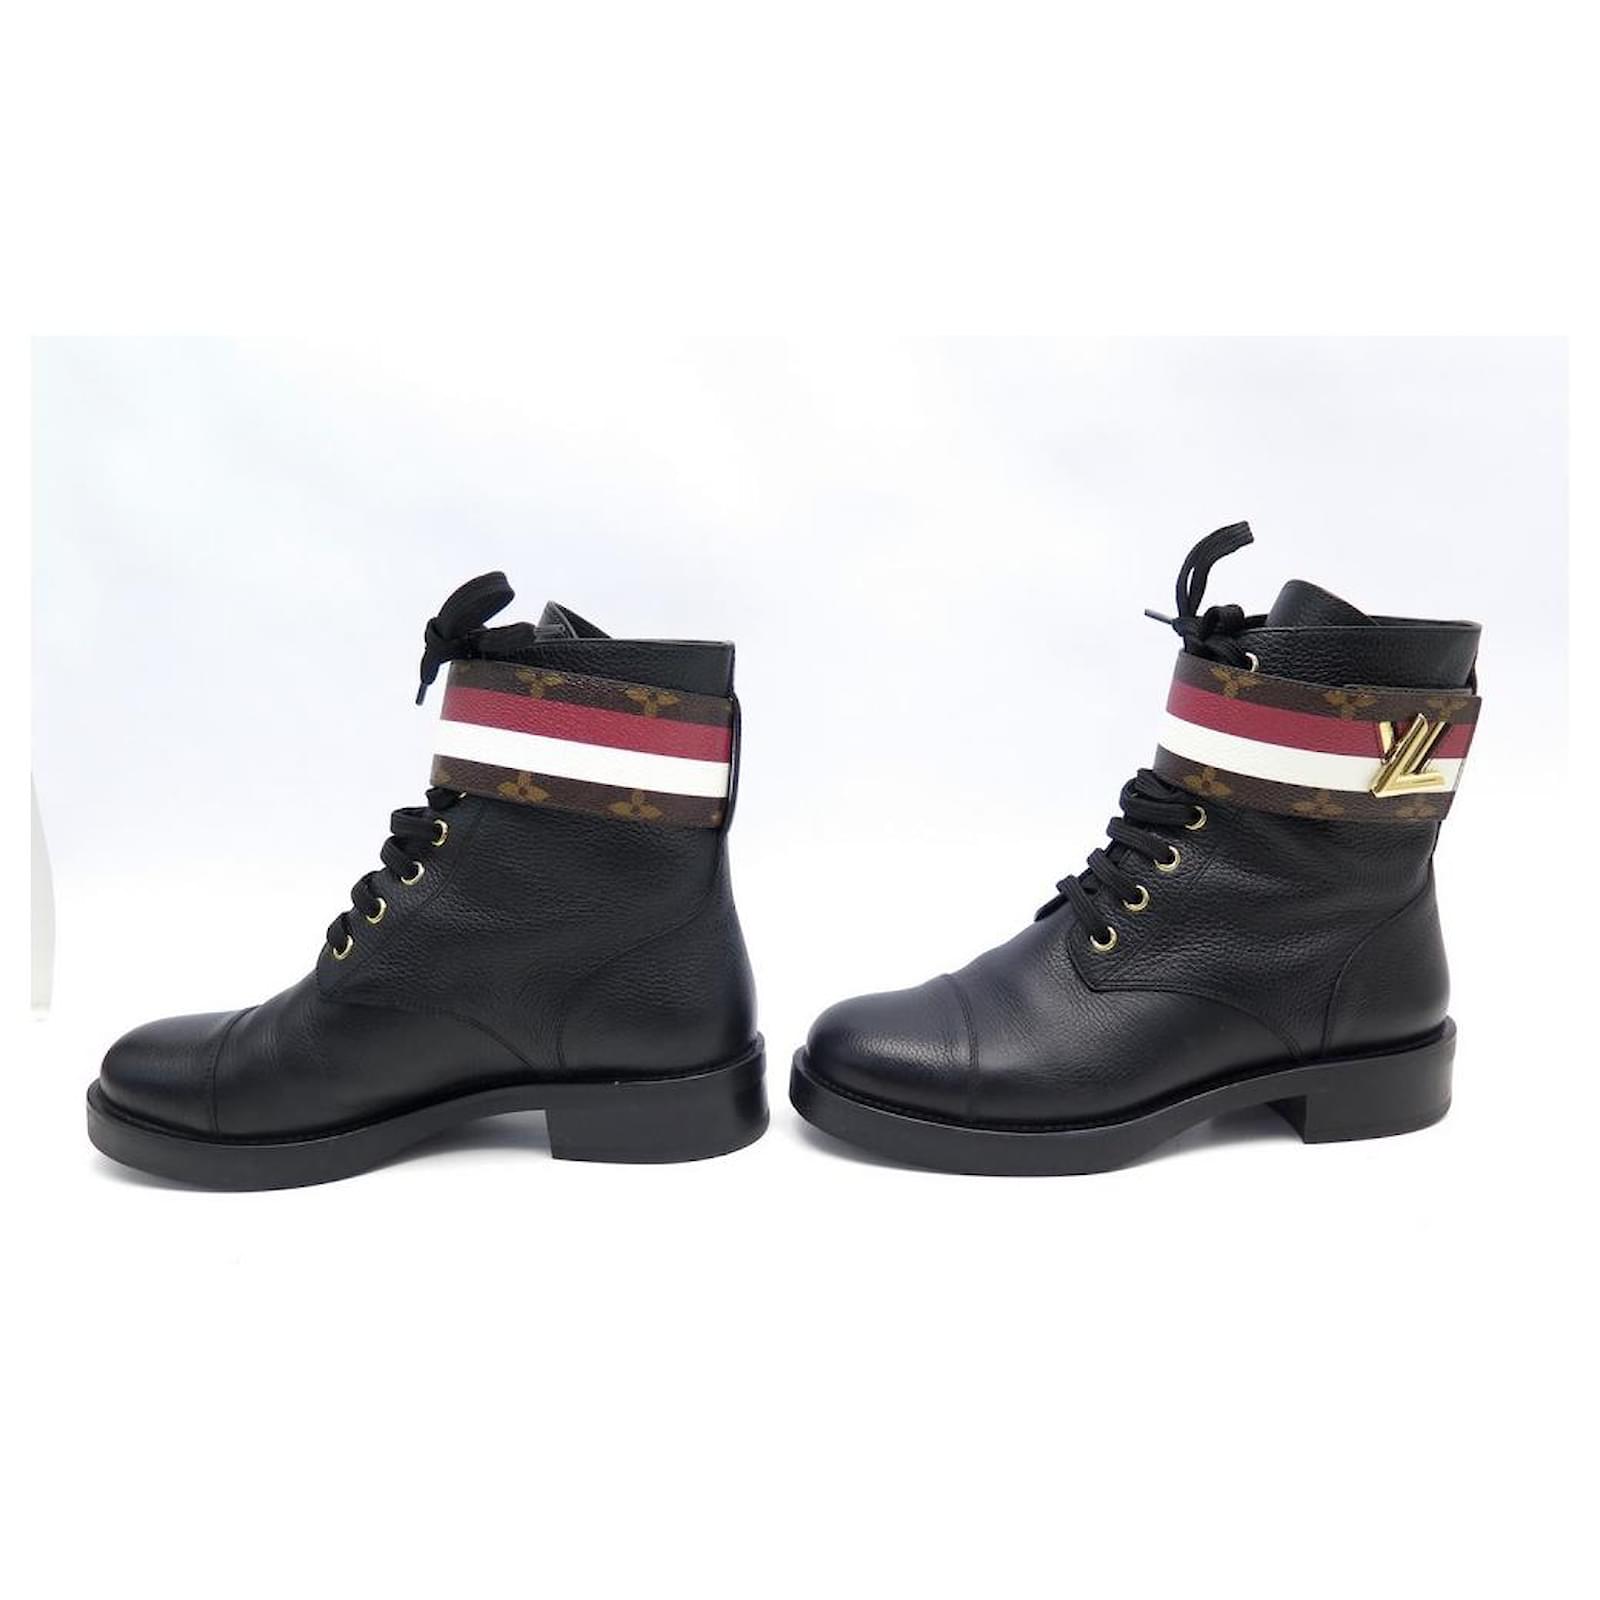 Buy Louis Vuitton Wonderland Ranger Shoes: New Releases & Iconic Styles